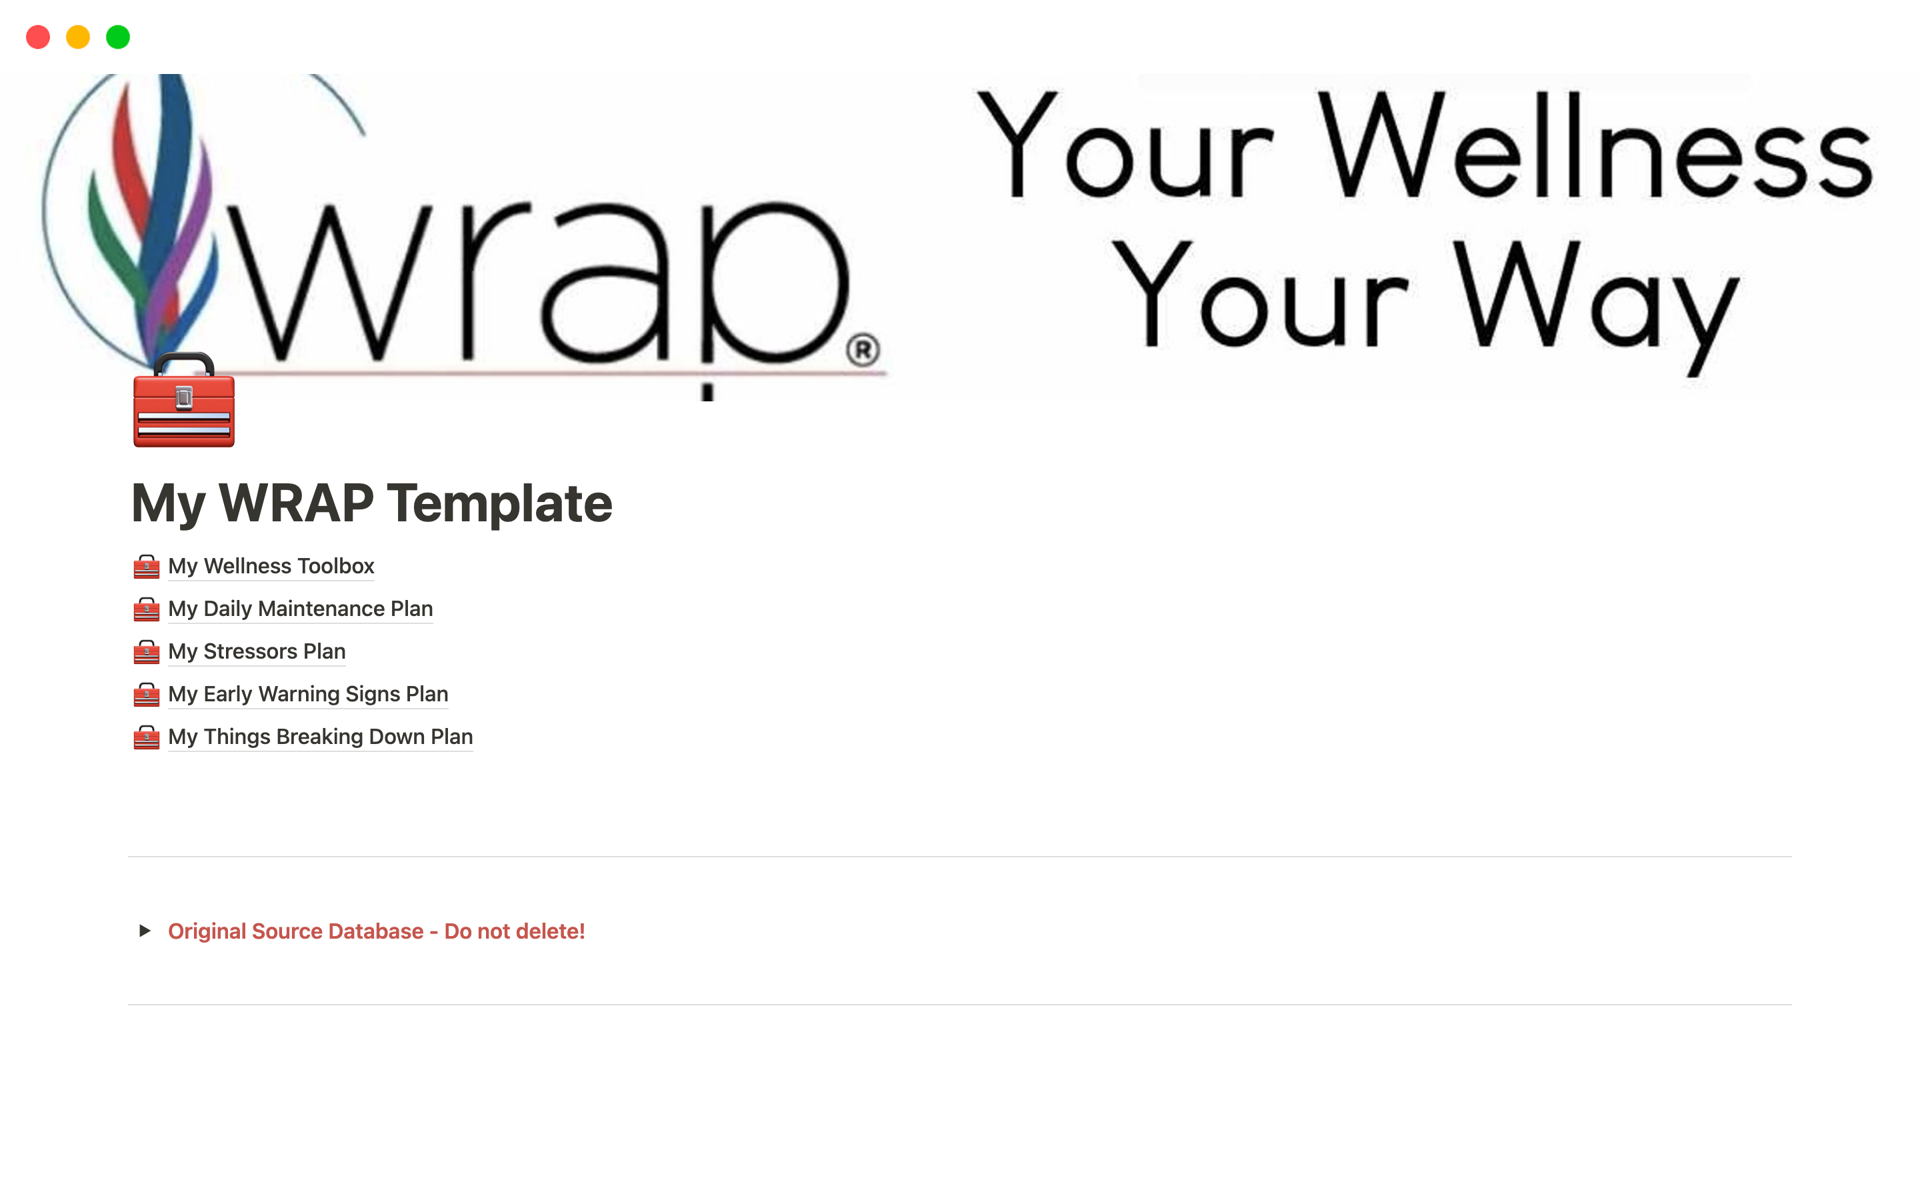 A template preview for WRAP (Wellness Recovery Action Plan)